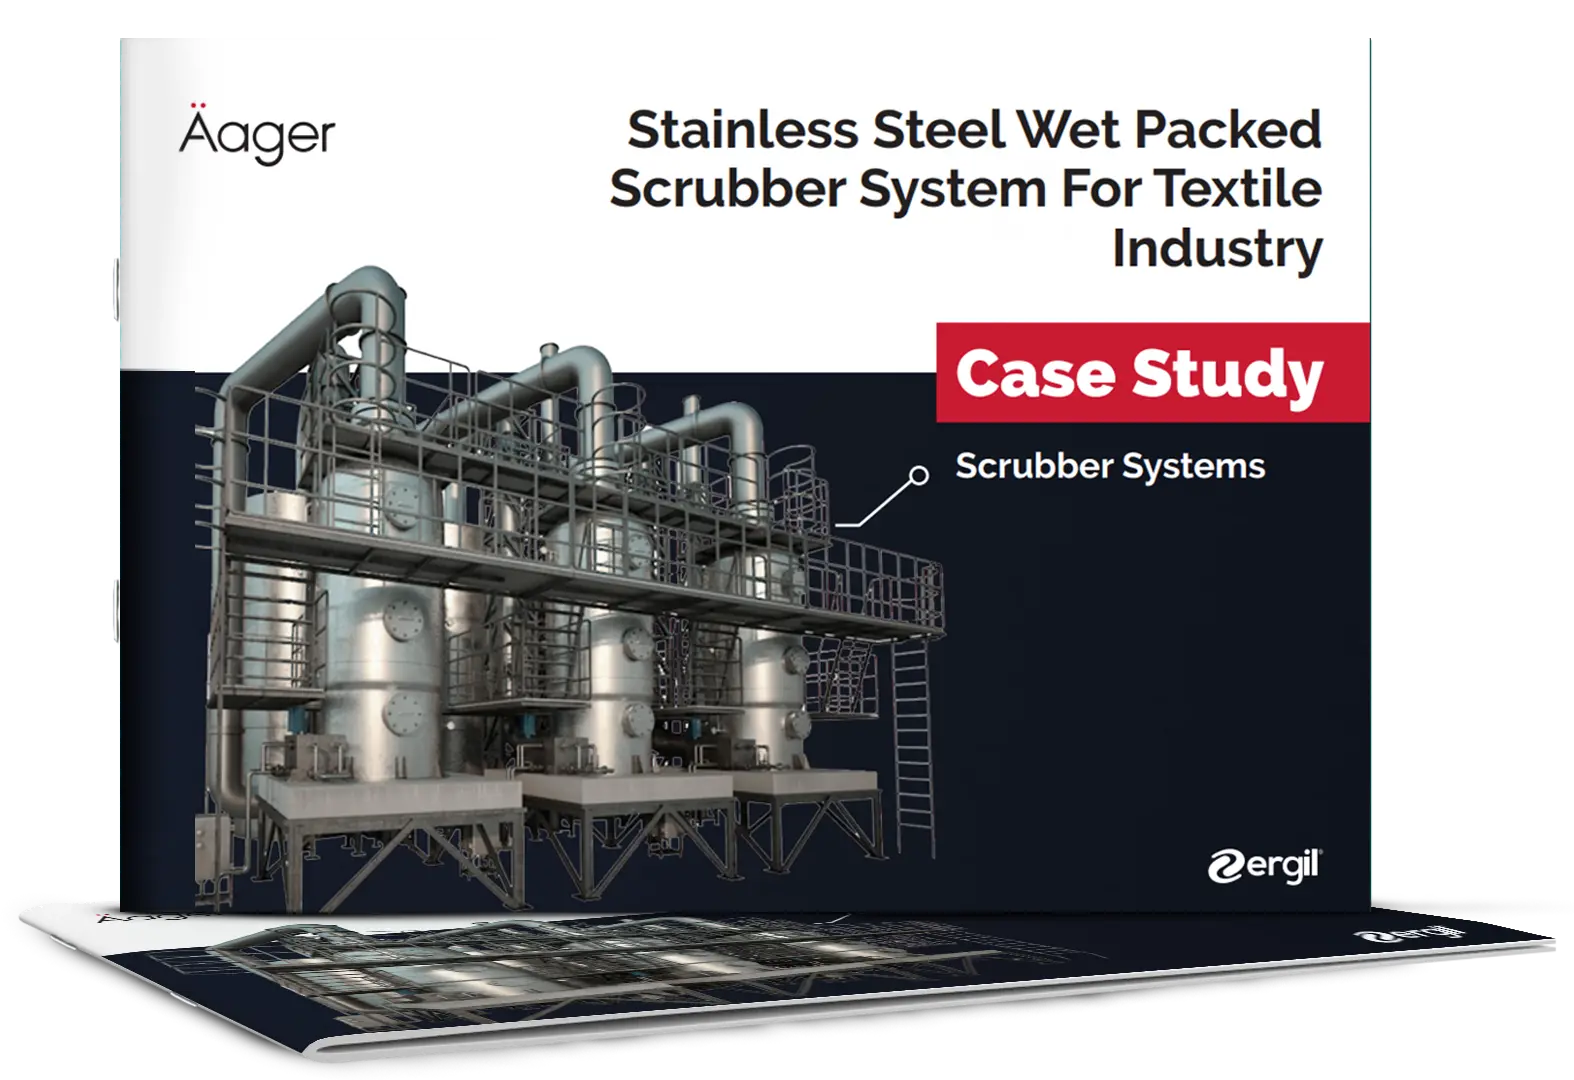 Stainless Steel Wet Packed Scrubber System for Textile Industry 32